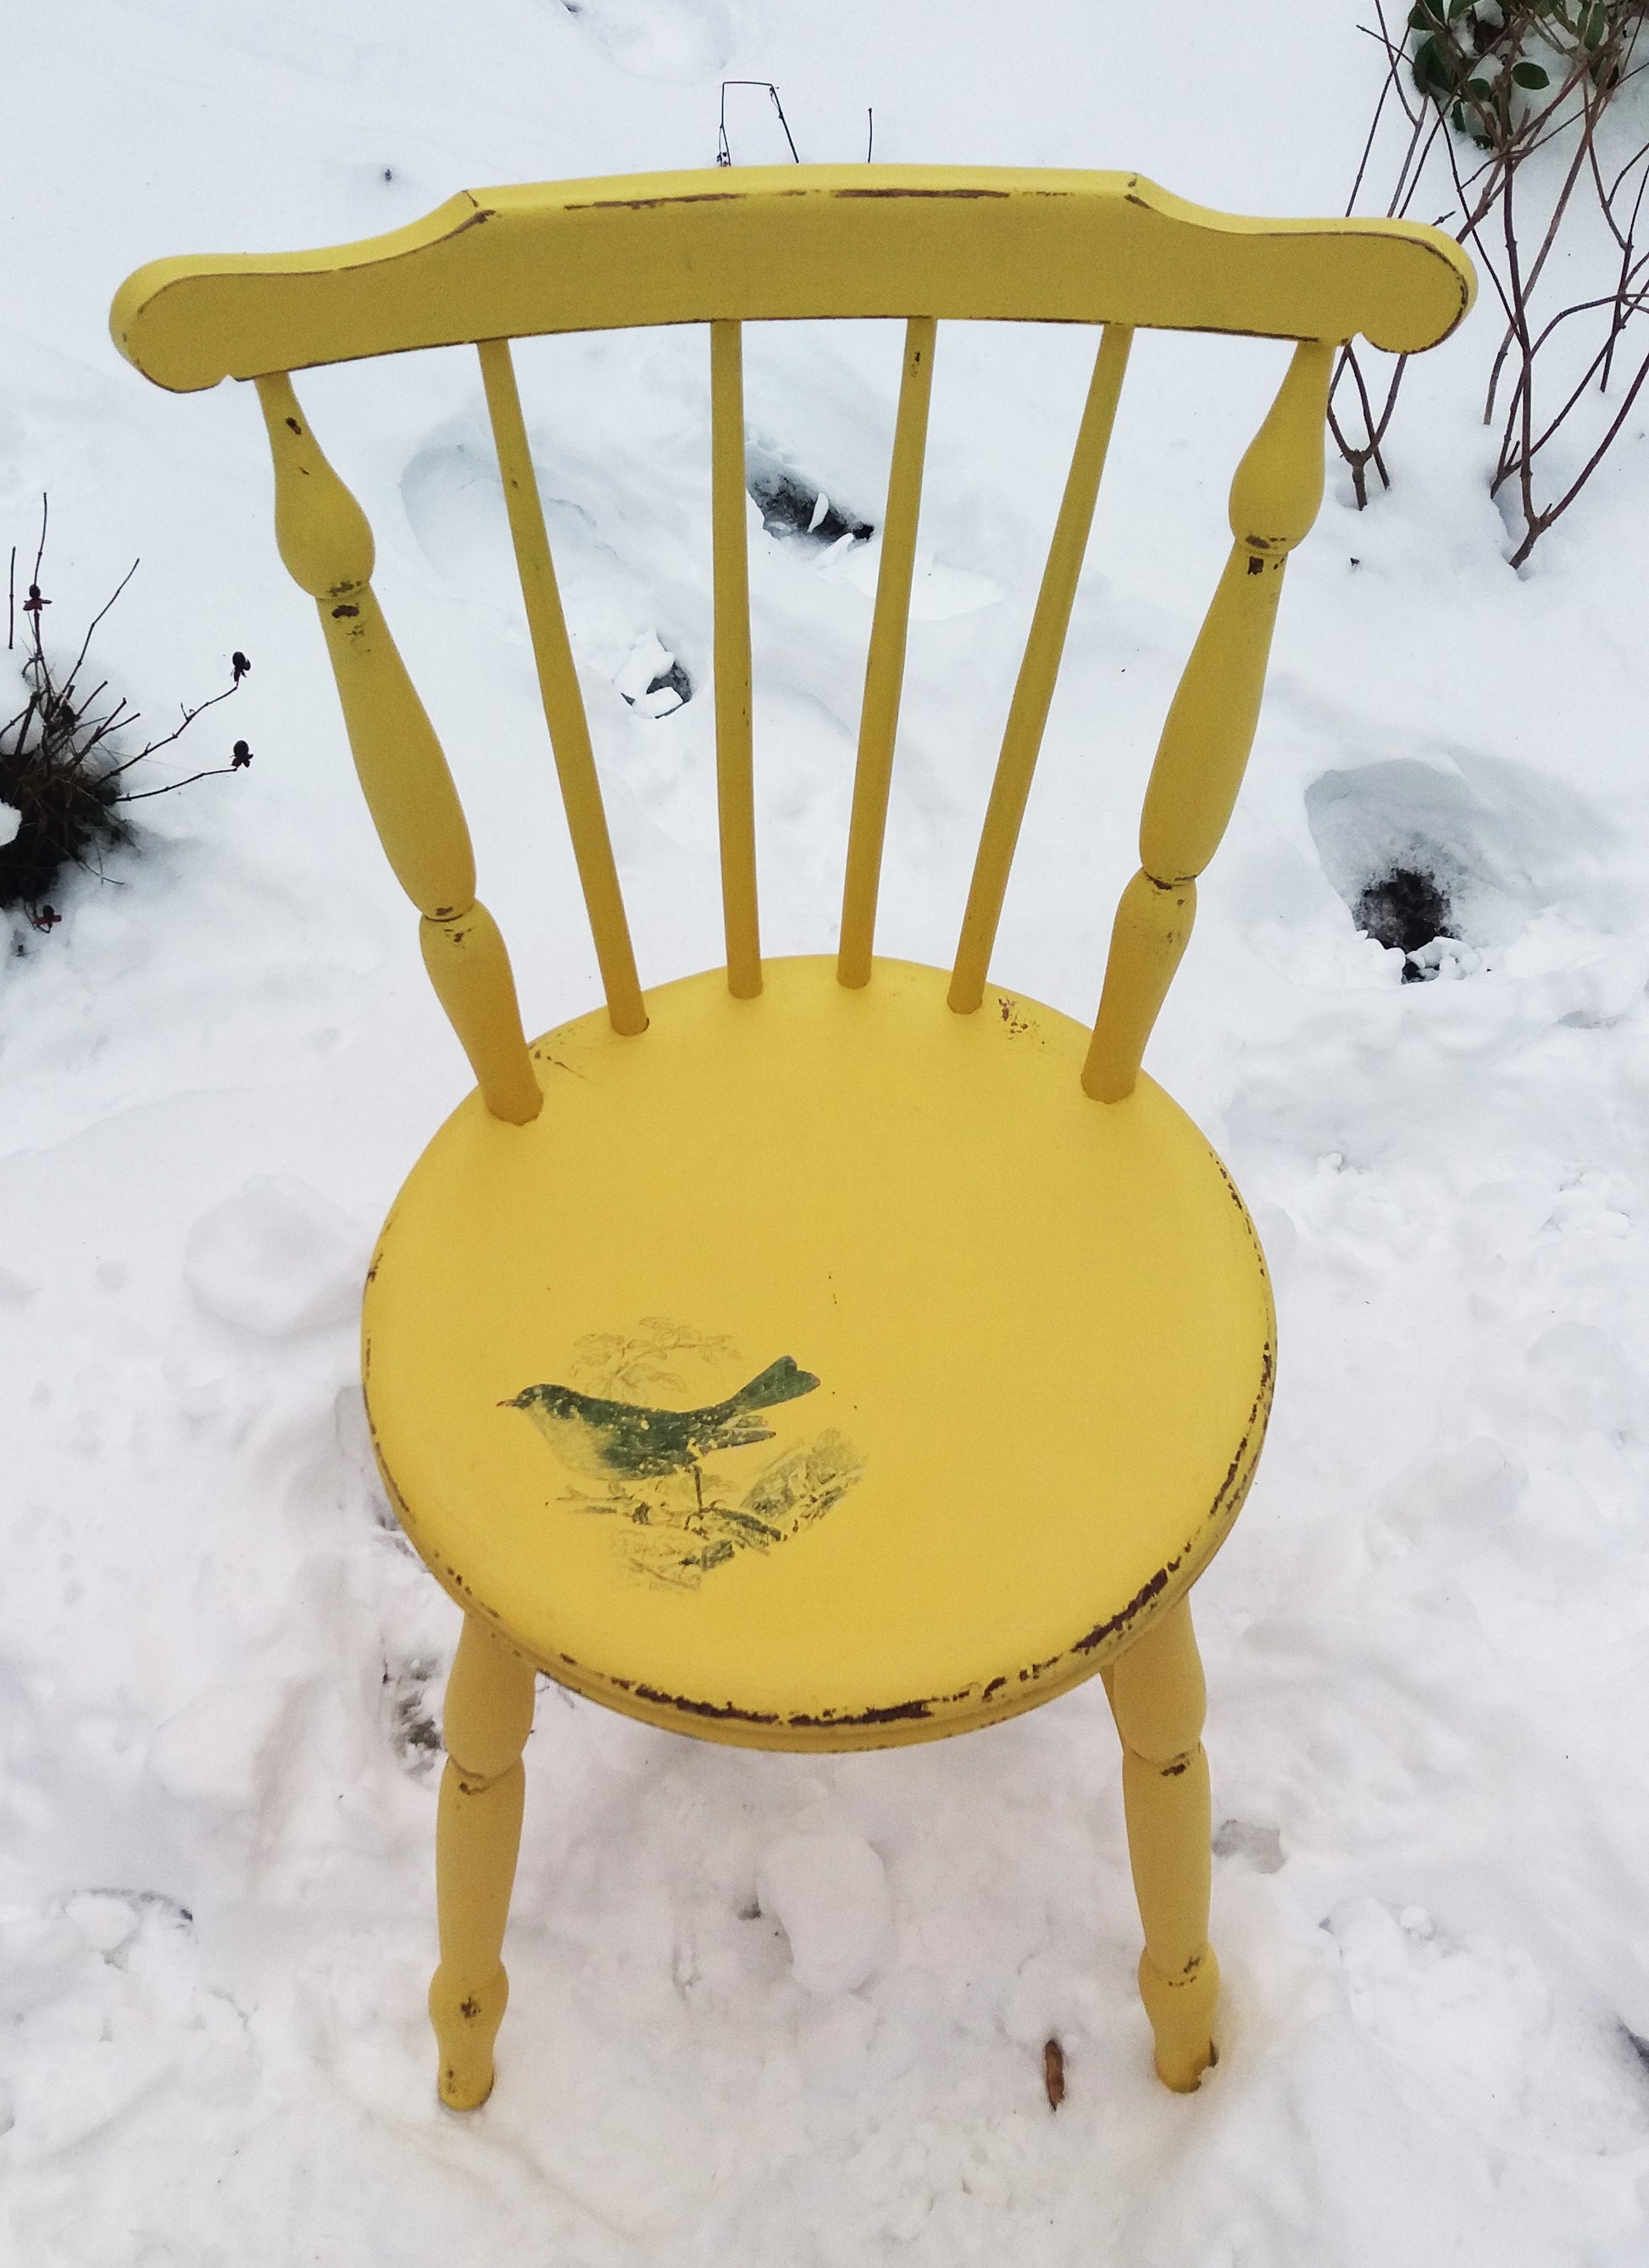 Vintage painted yellow penny chair with retro jade green bird design